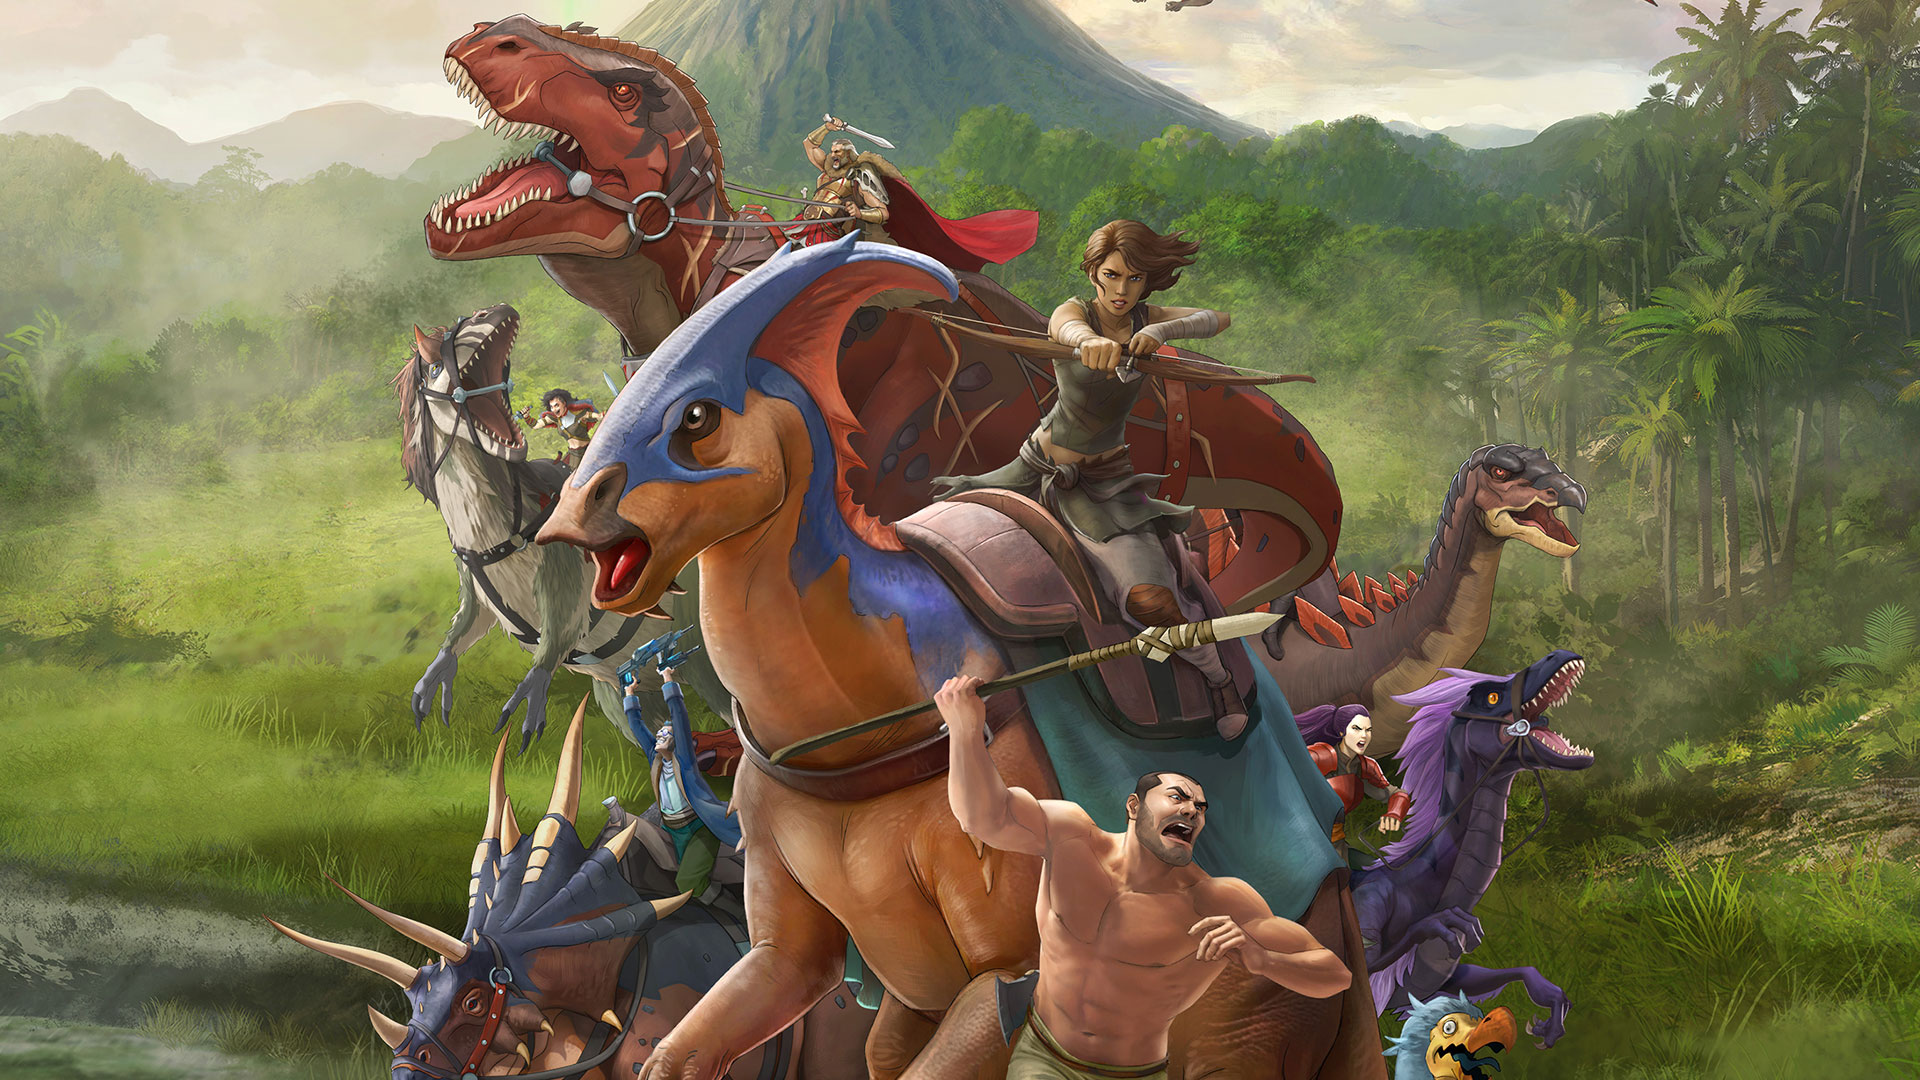 ARK: The Animated Series is now live on Paramount+